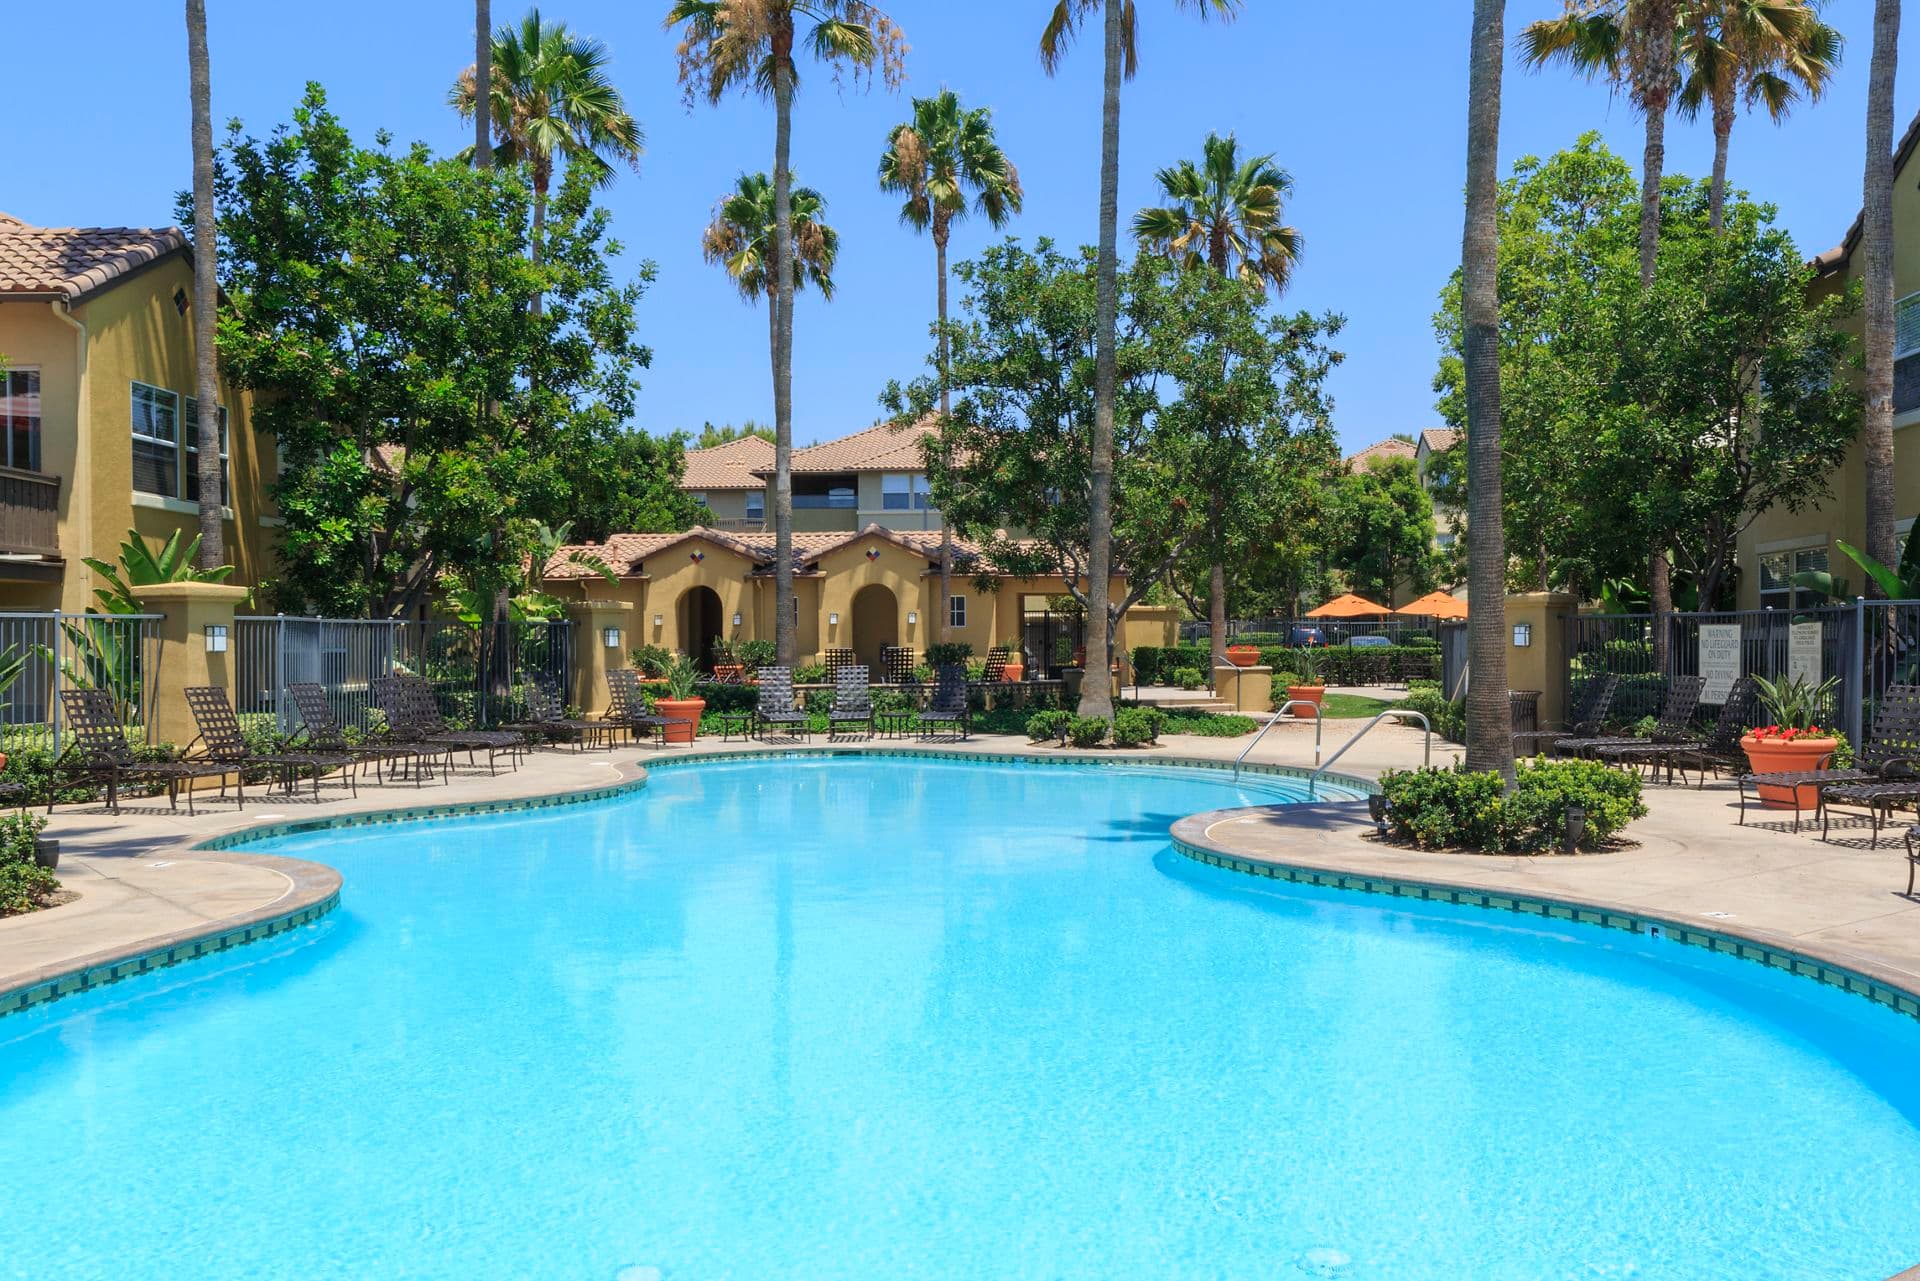 Pool view at Solana Apartment Homes in Irvine, CA.